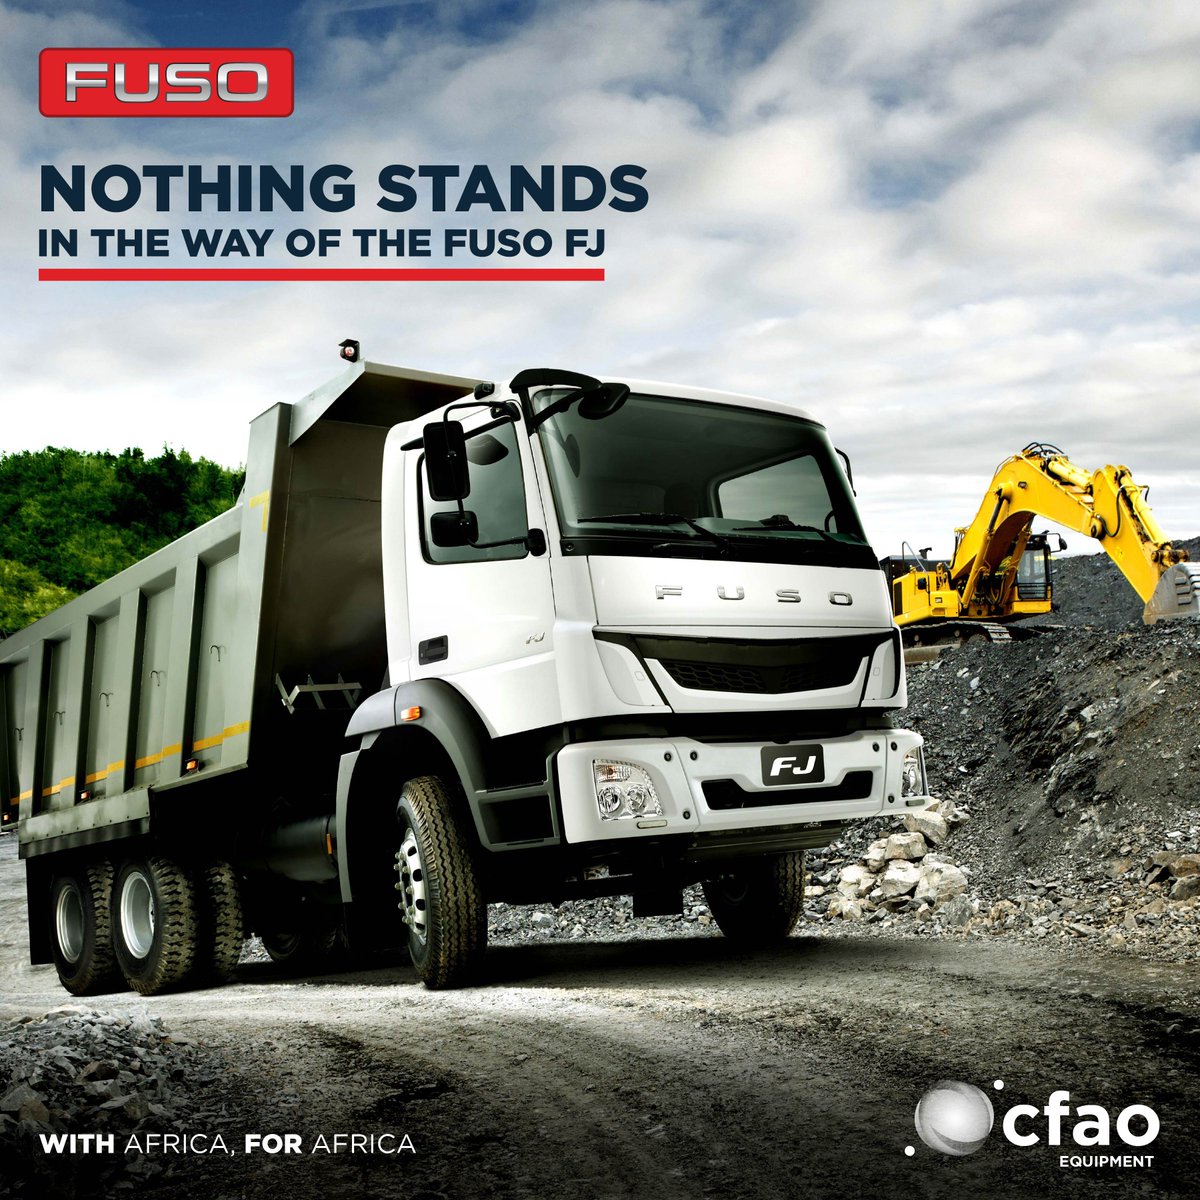 Very low operating costs, reliability and functionality. These three guiding principles in the design brief for the FUSO FJ to give you a truck that’s built for maximum profitability.

#CFAOEQUIPMENTTANZANIA